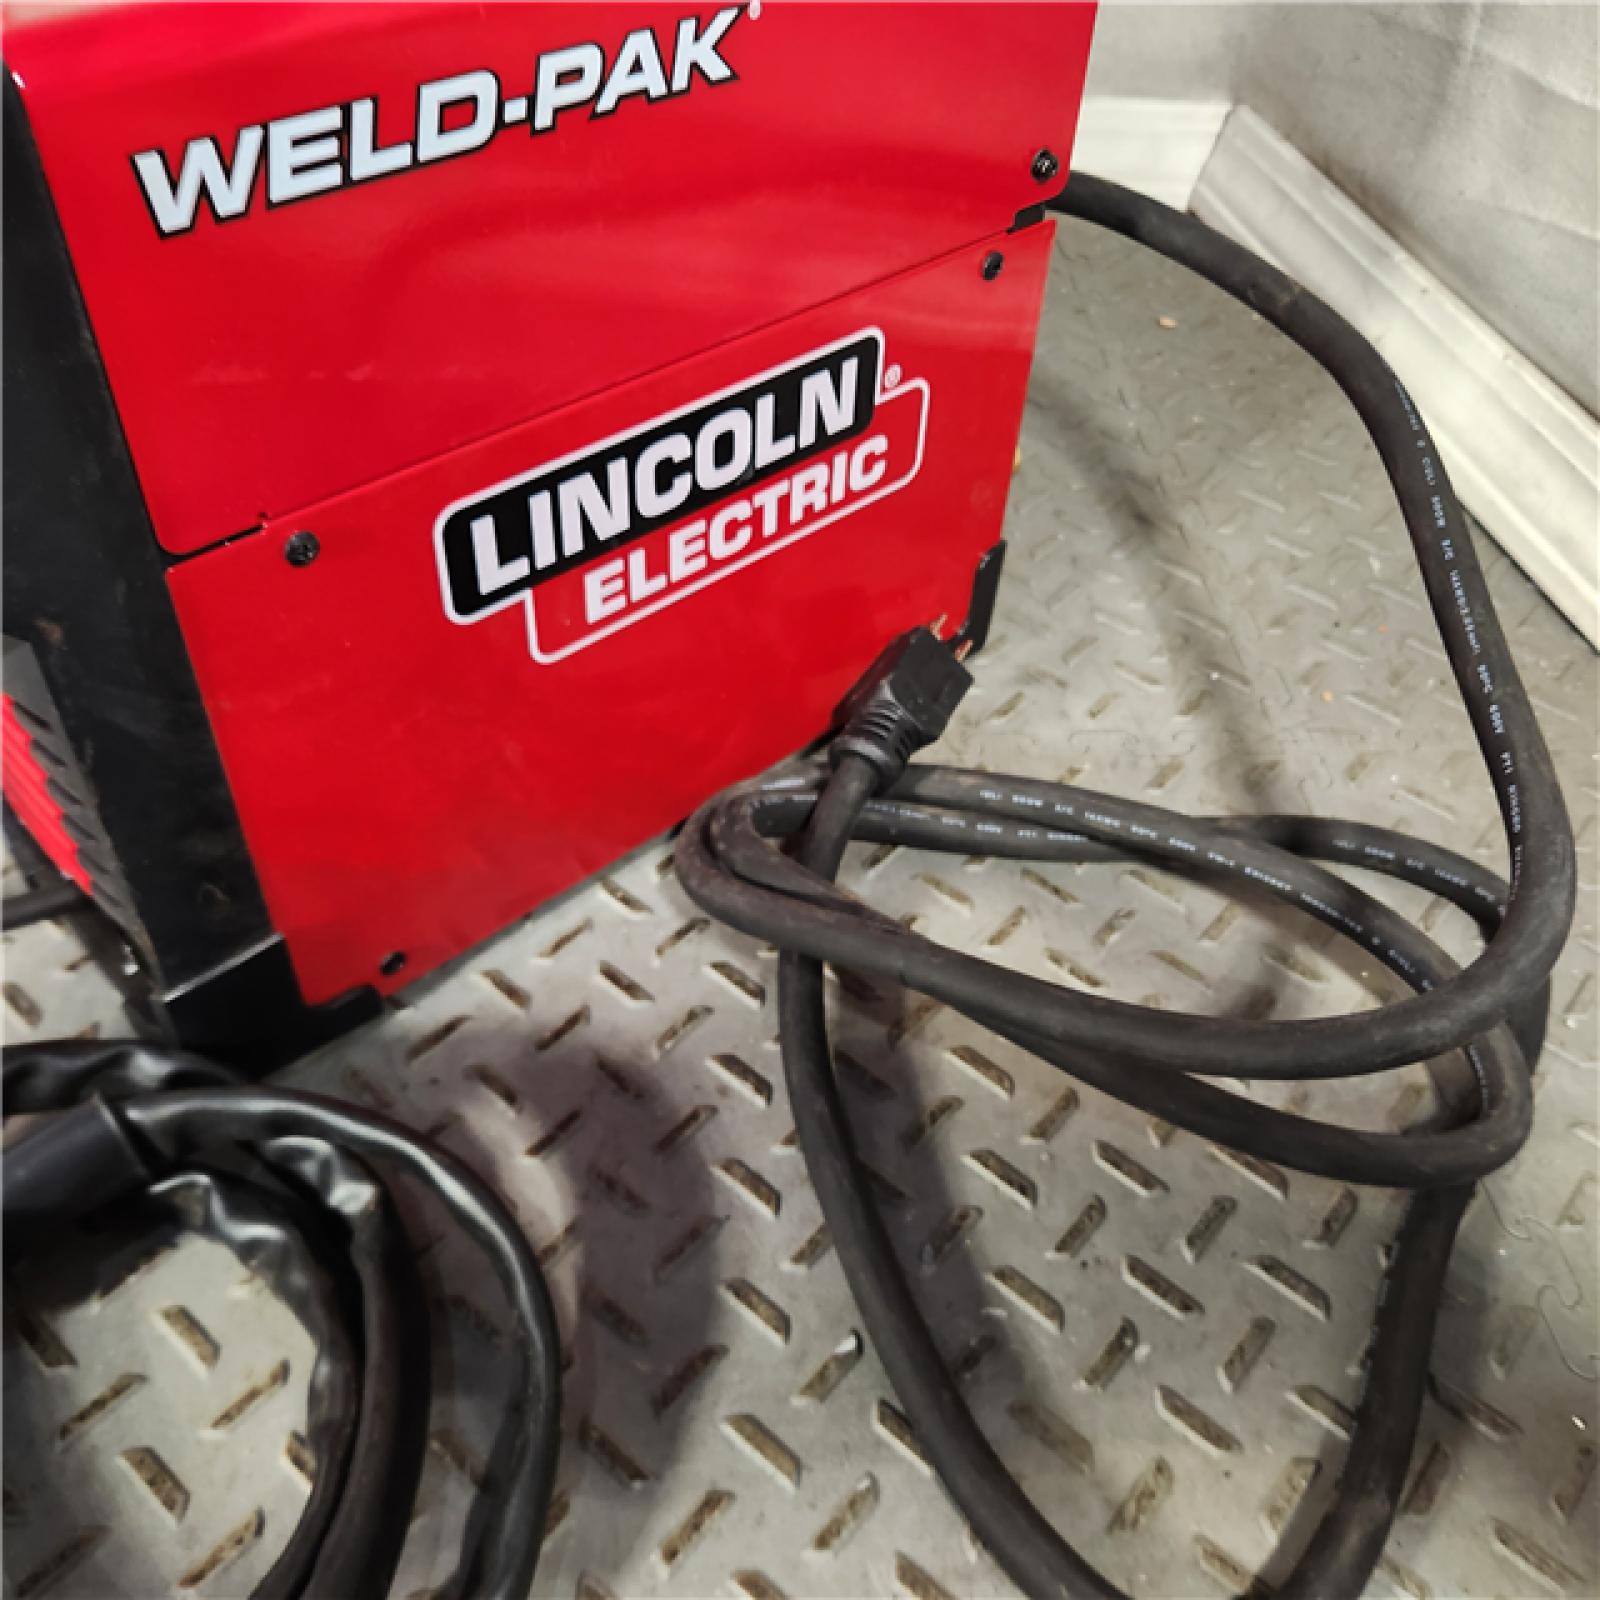 Houston location - AS-IS Lincoln Electric WELD-PAK 90i MIG and Flux-Cored Wire Feeder Welder with Gas Regulator - Appears IN GOOD Condition